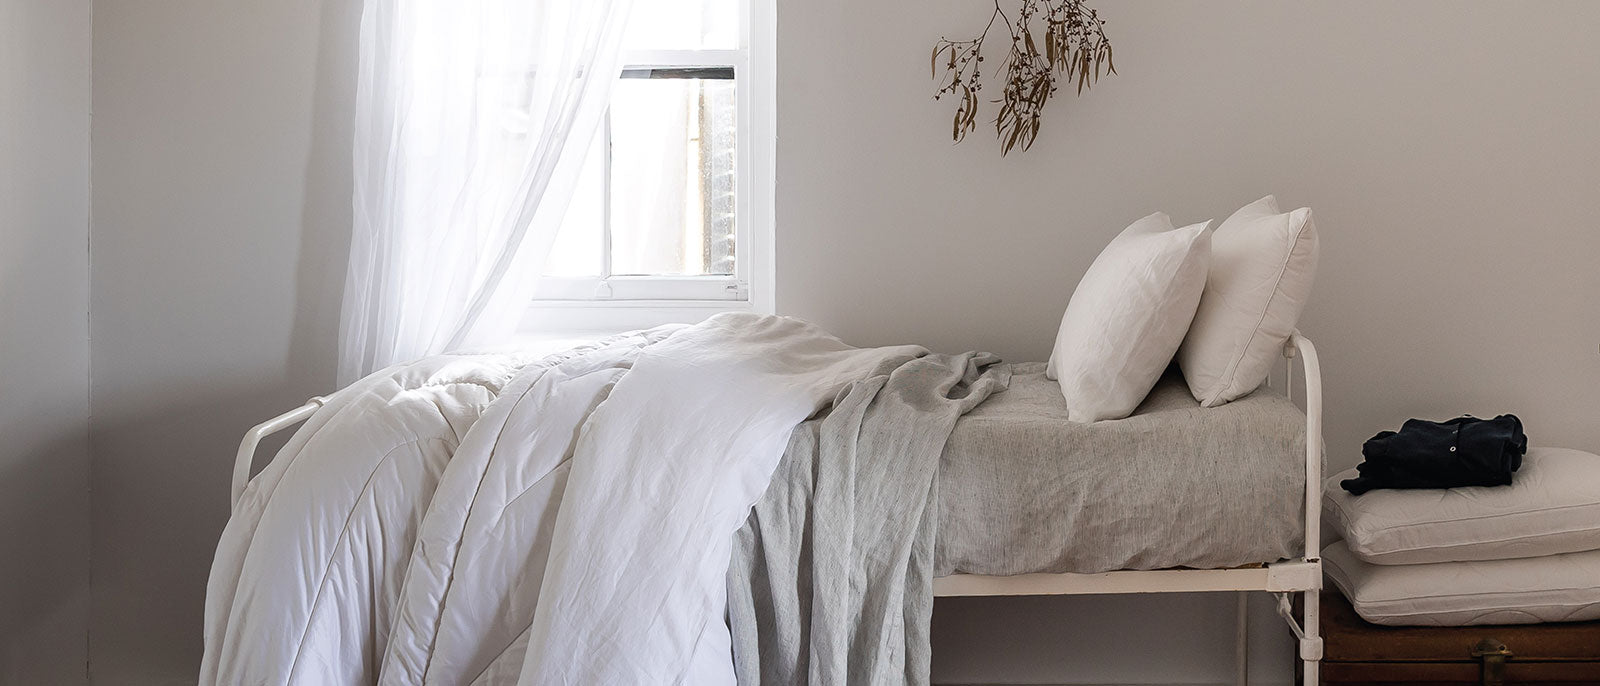 Why we use wool and TENCEL™ in our sleepwear